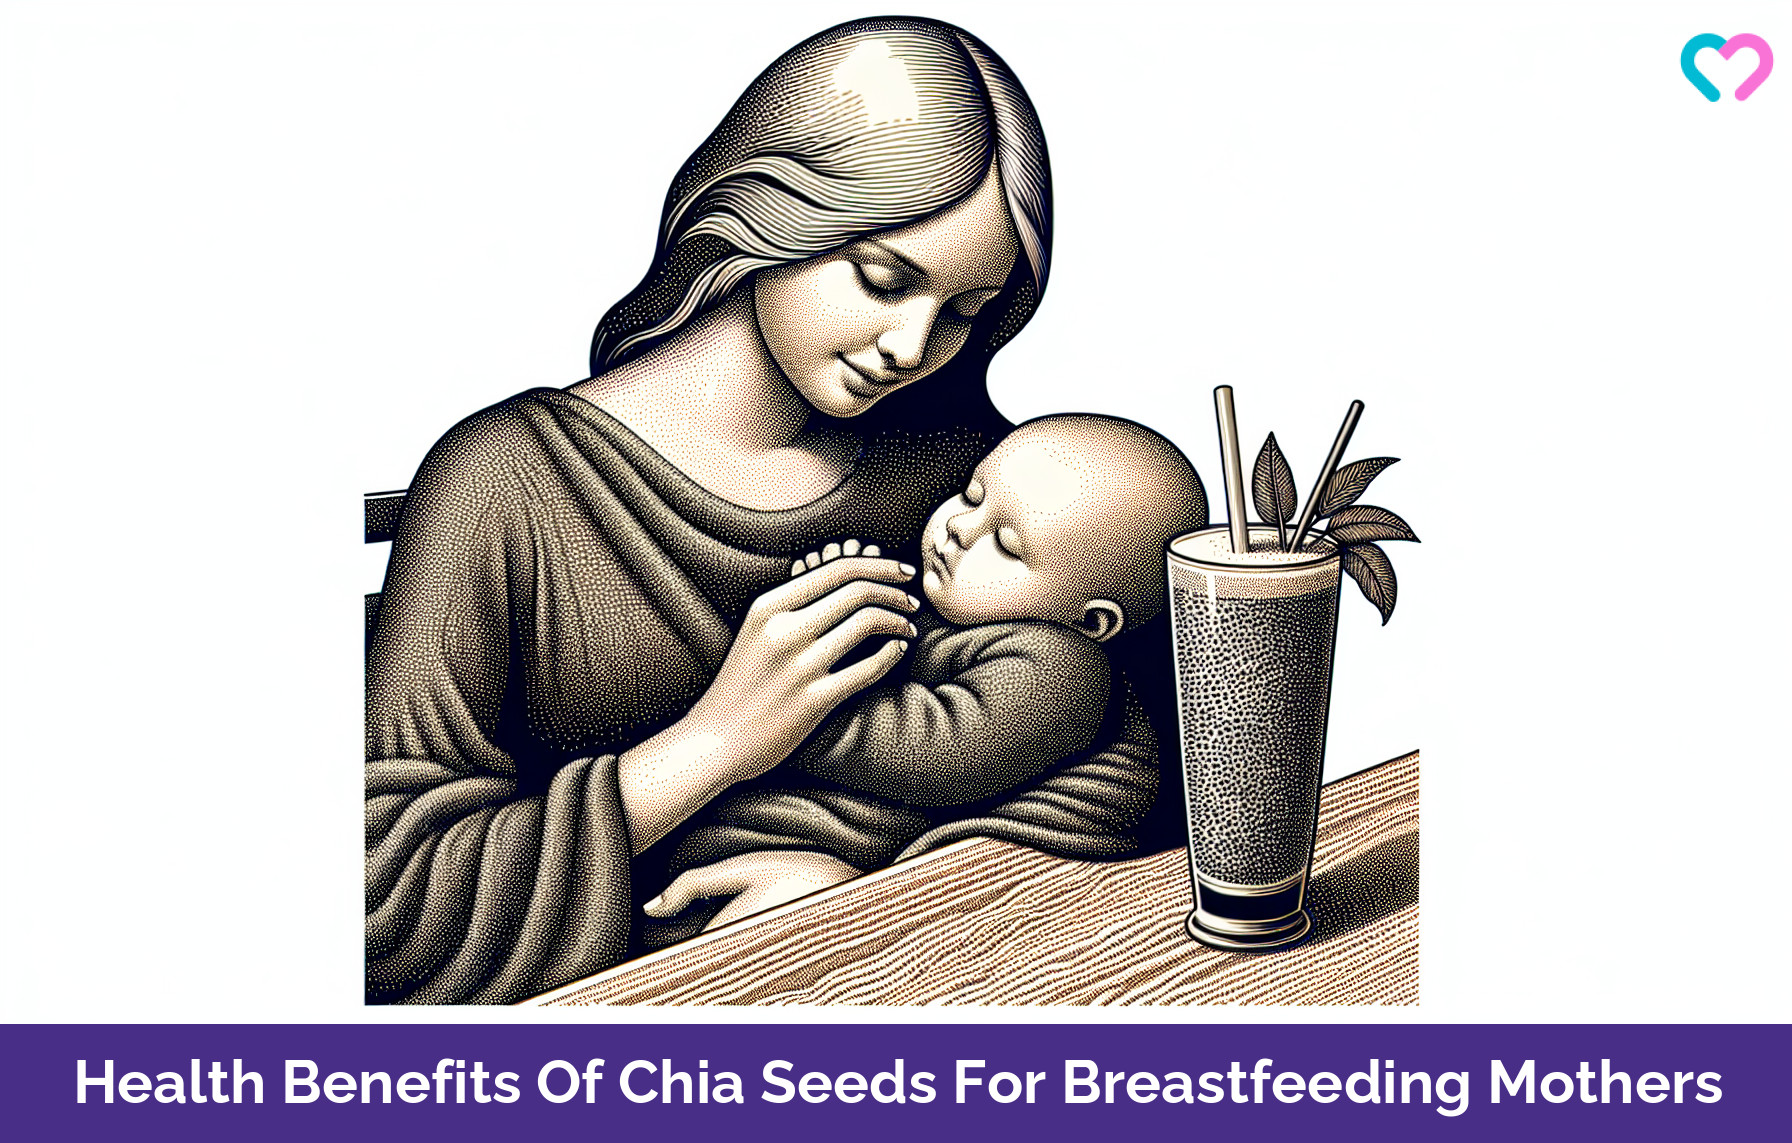 Chia Seeds For Breastfeeding Mothers_illustration